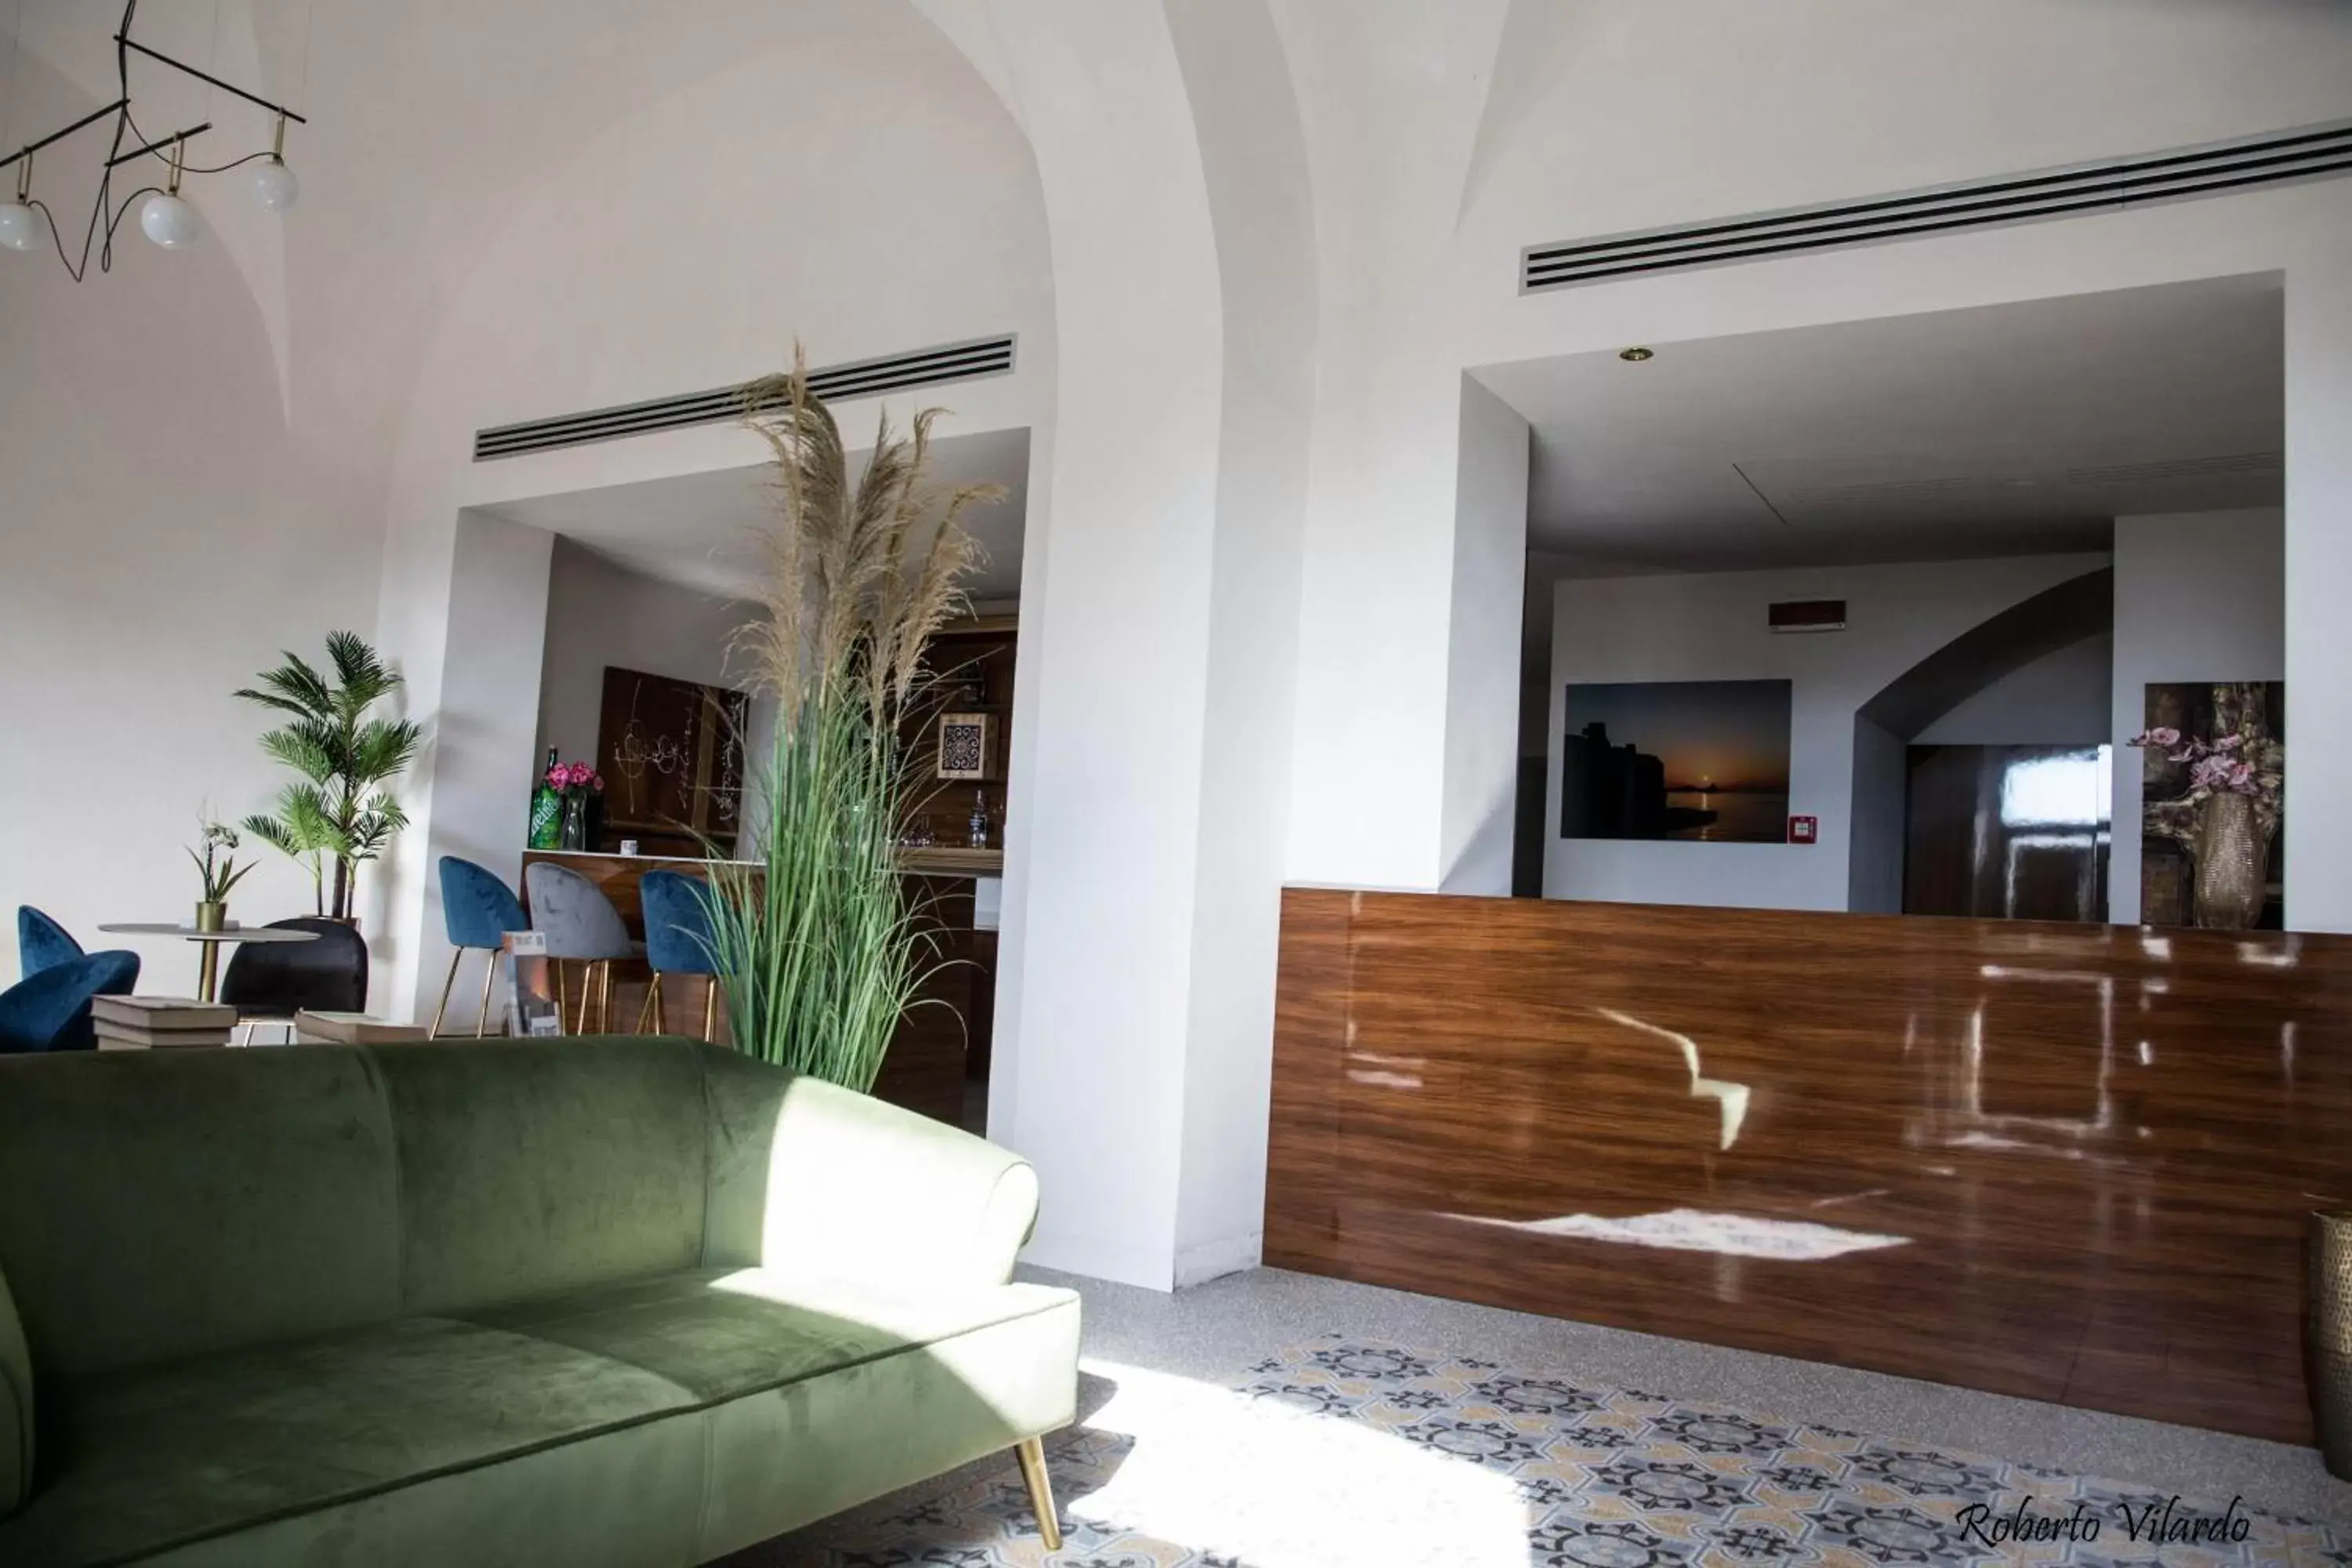 Lounge or bar, Lobby/Reception in 20 Miglia Boutique Hotel